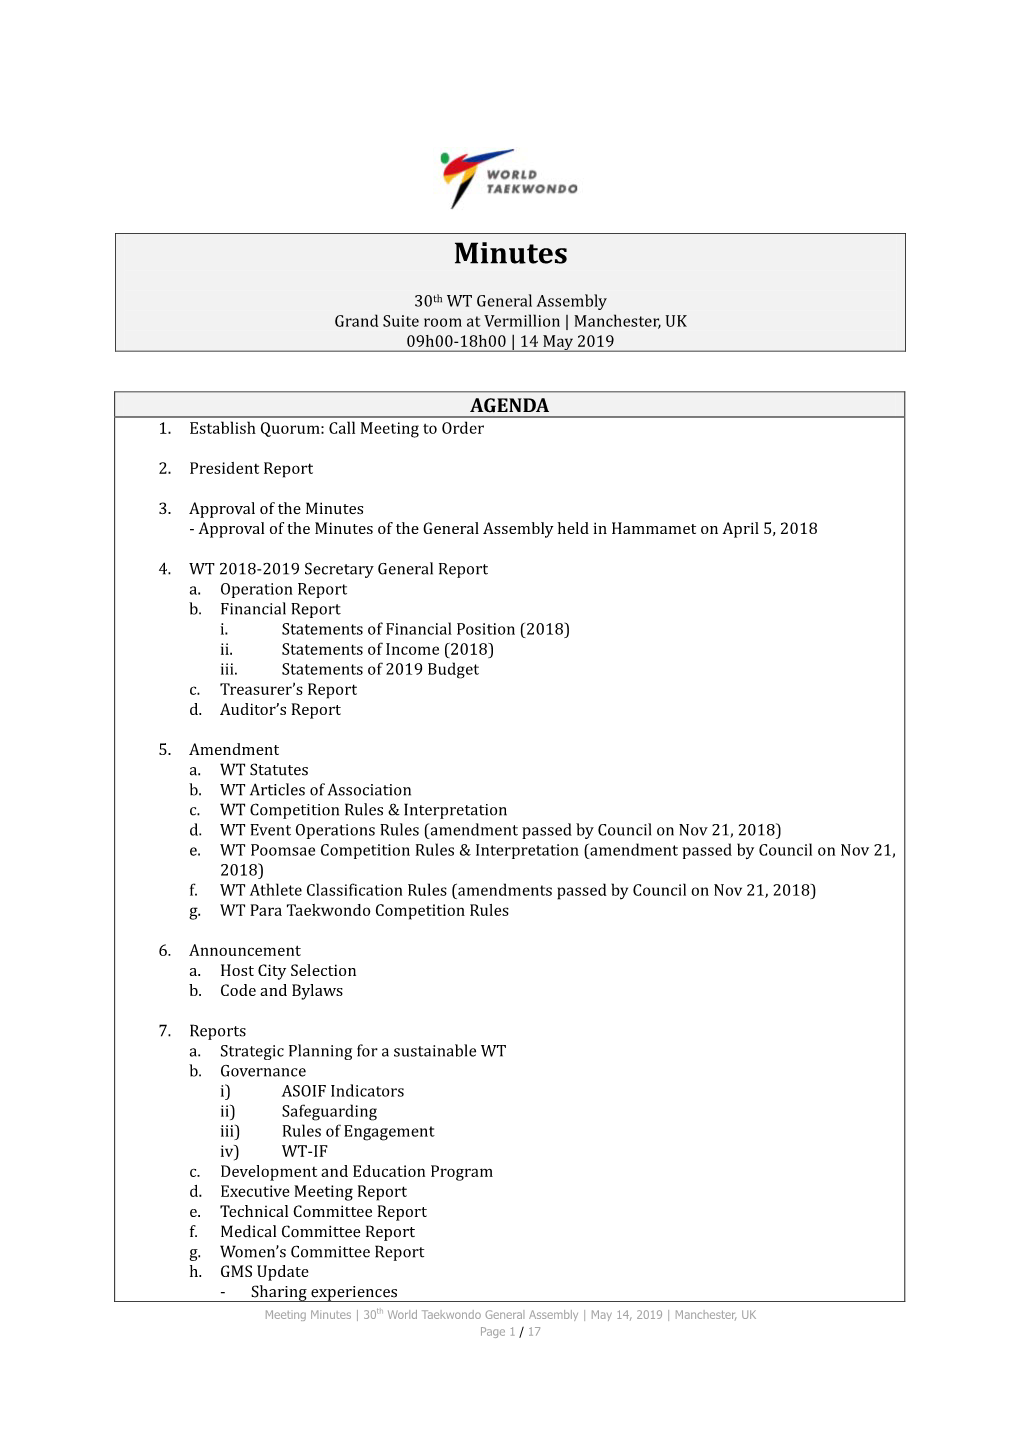 Minutes of 2019 General Assembly on May 14, 2019